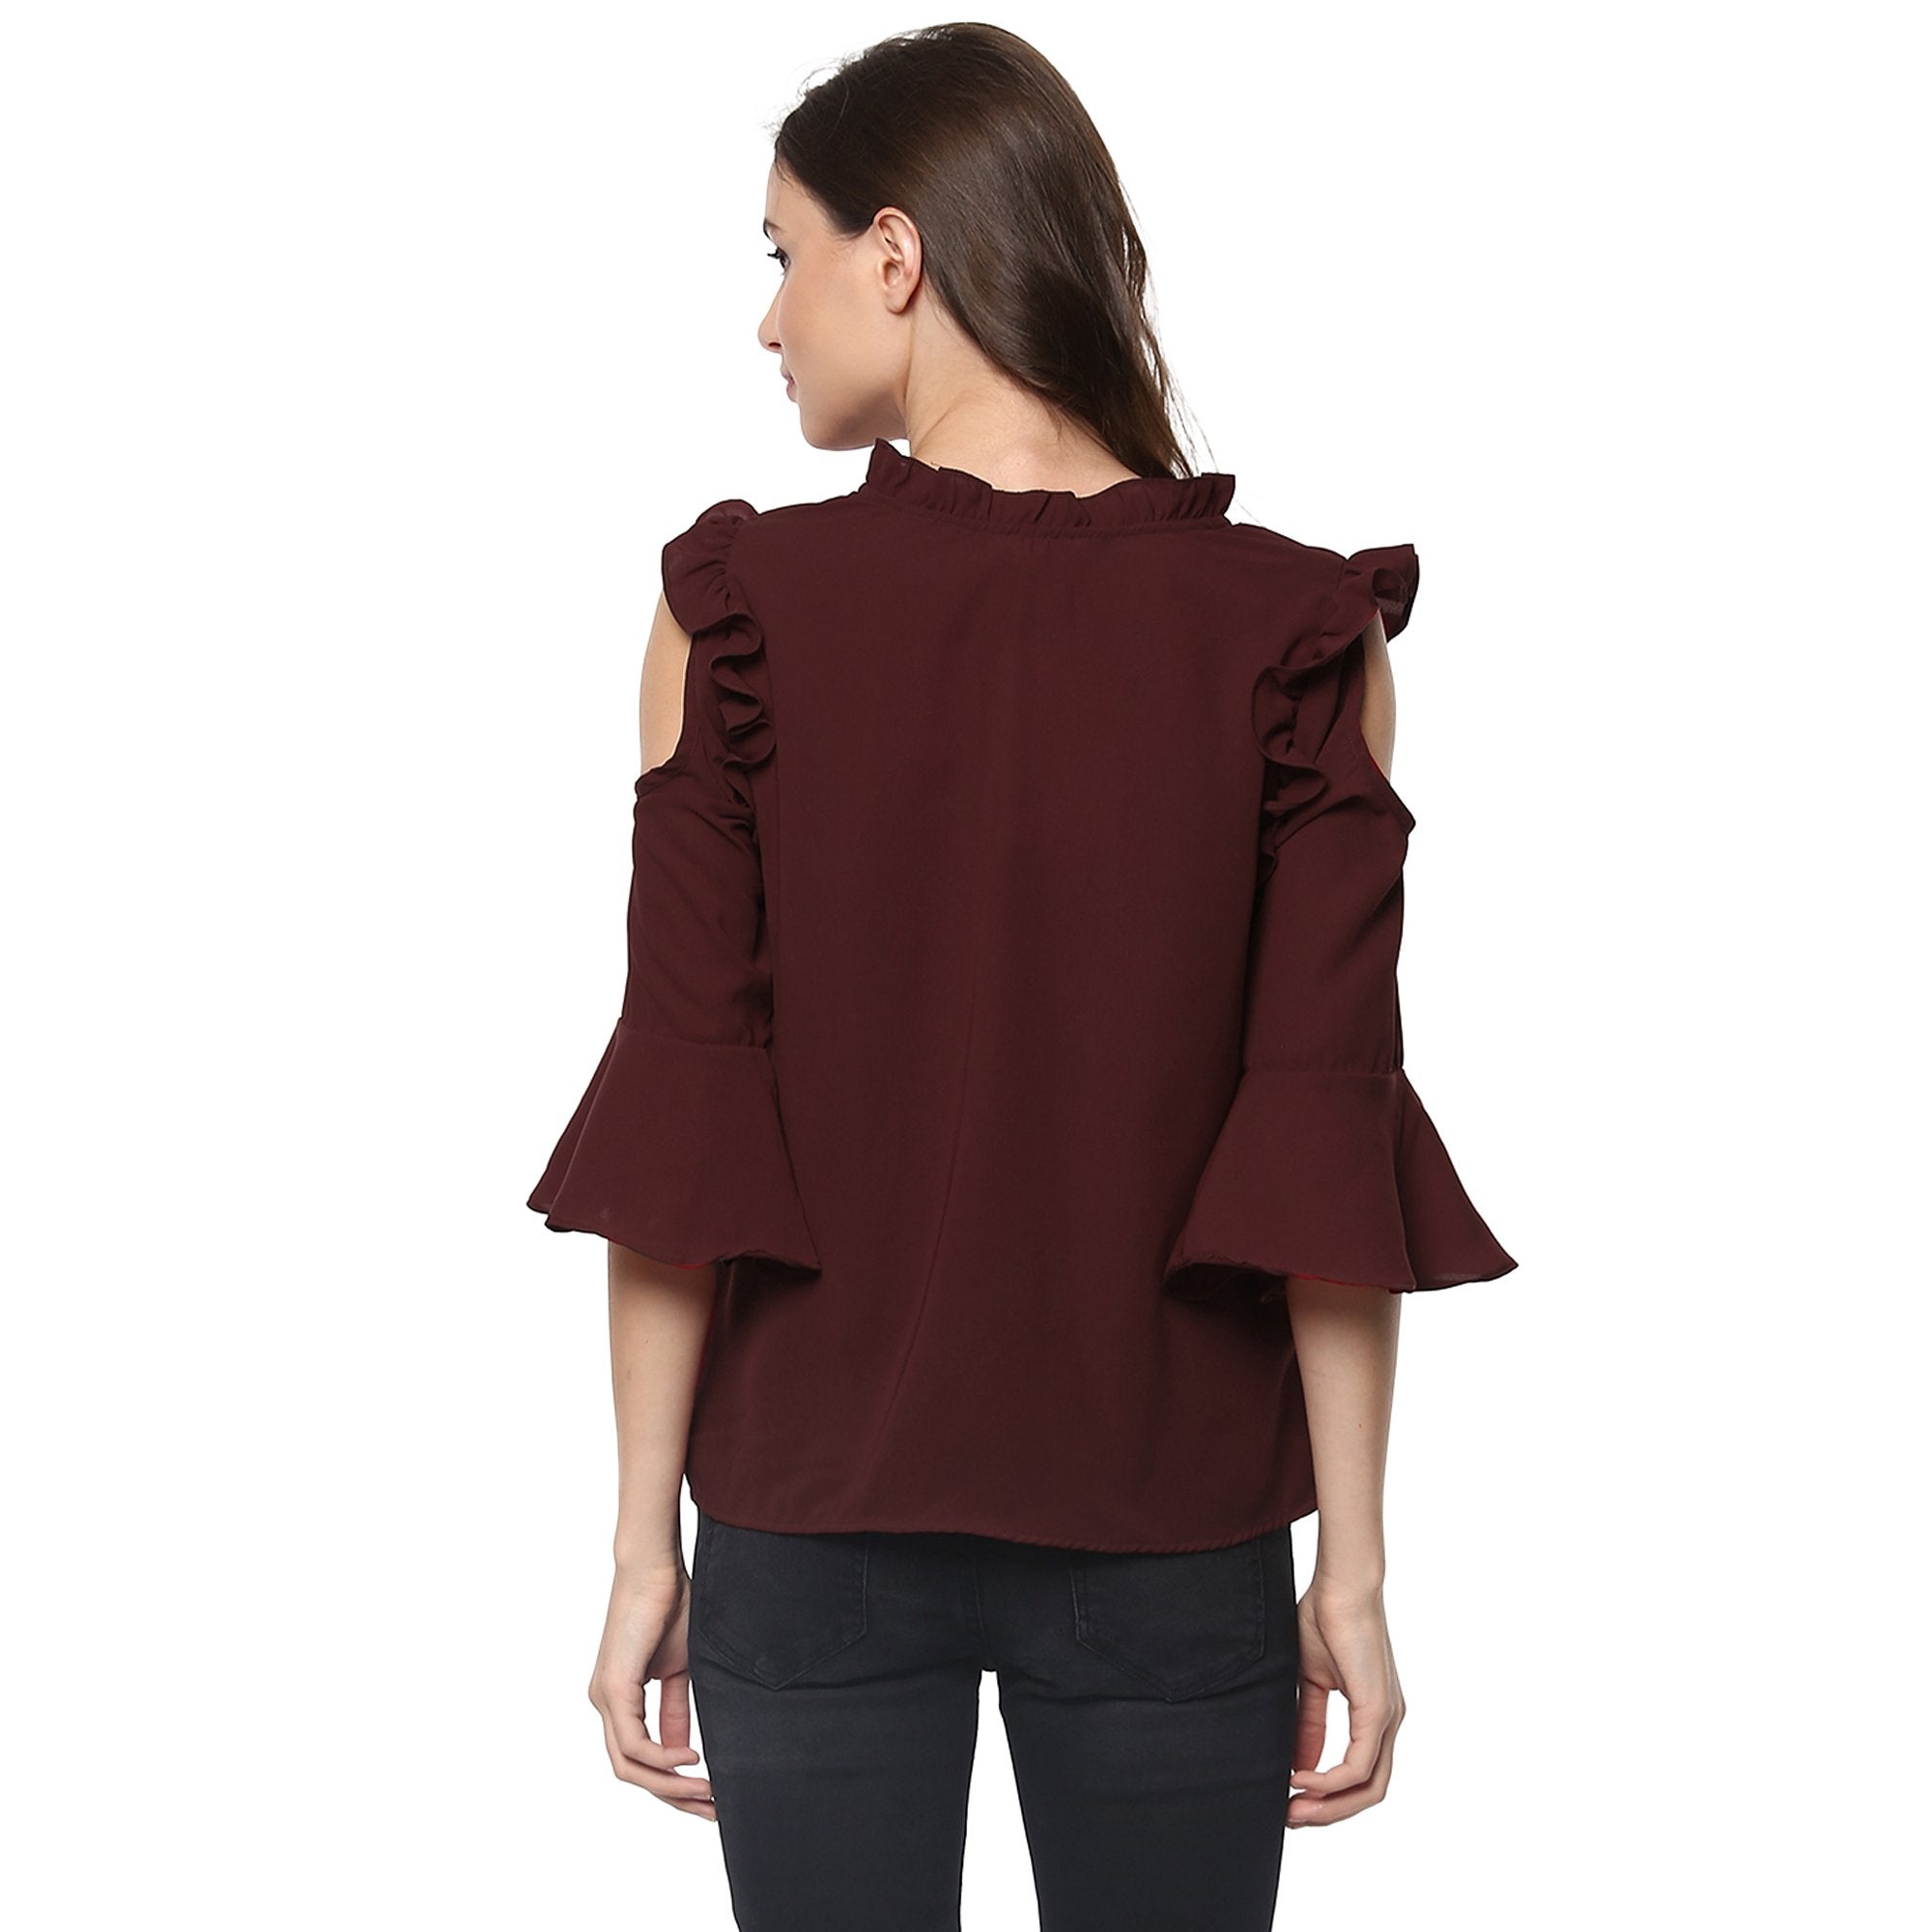 Women's Solid Ruffle Cold Shoulder Top - Pannkh